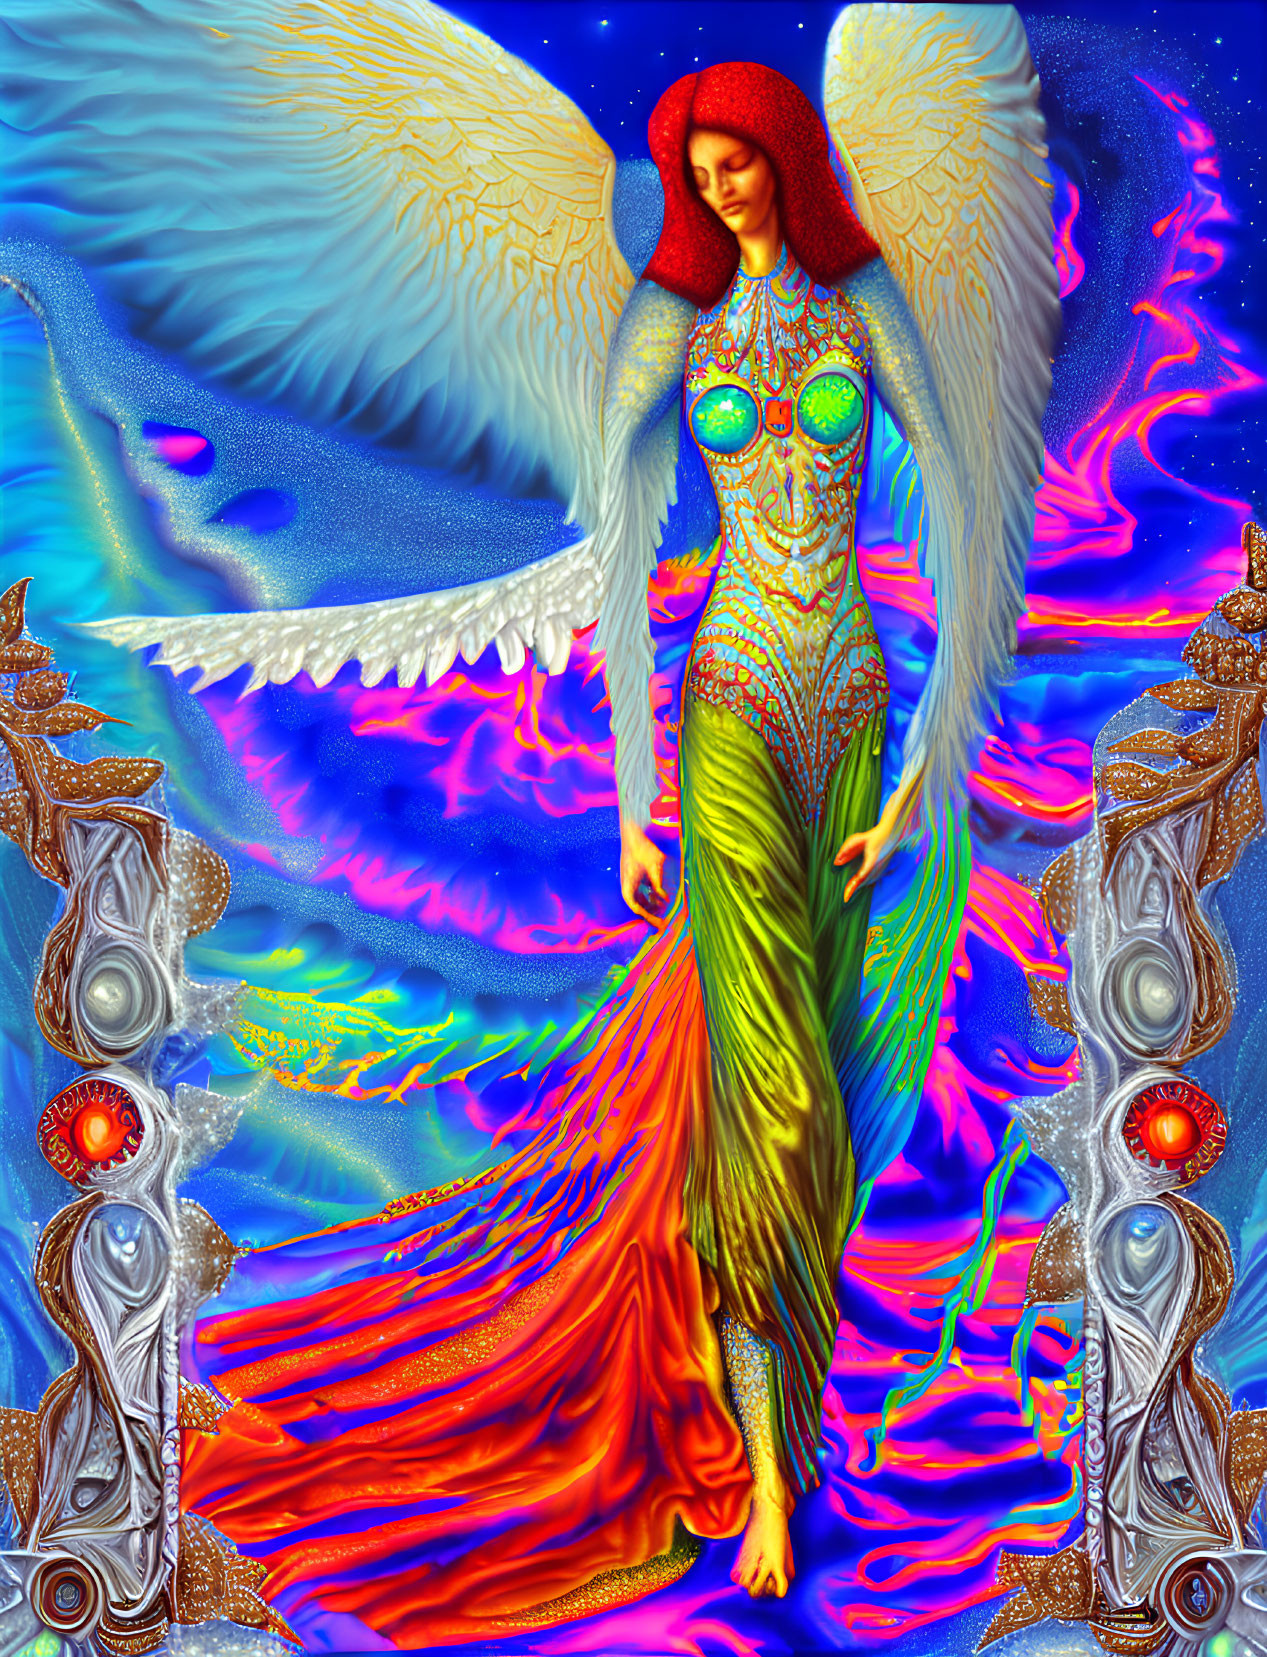 Colorful digital artwork of ethereal figure with wings and red hair on cosmic background